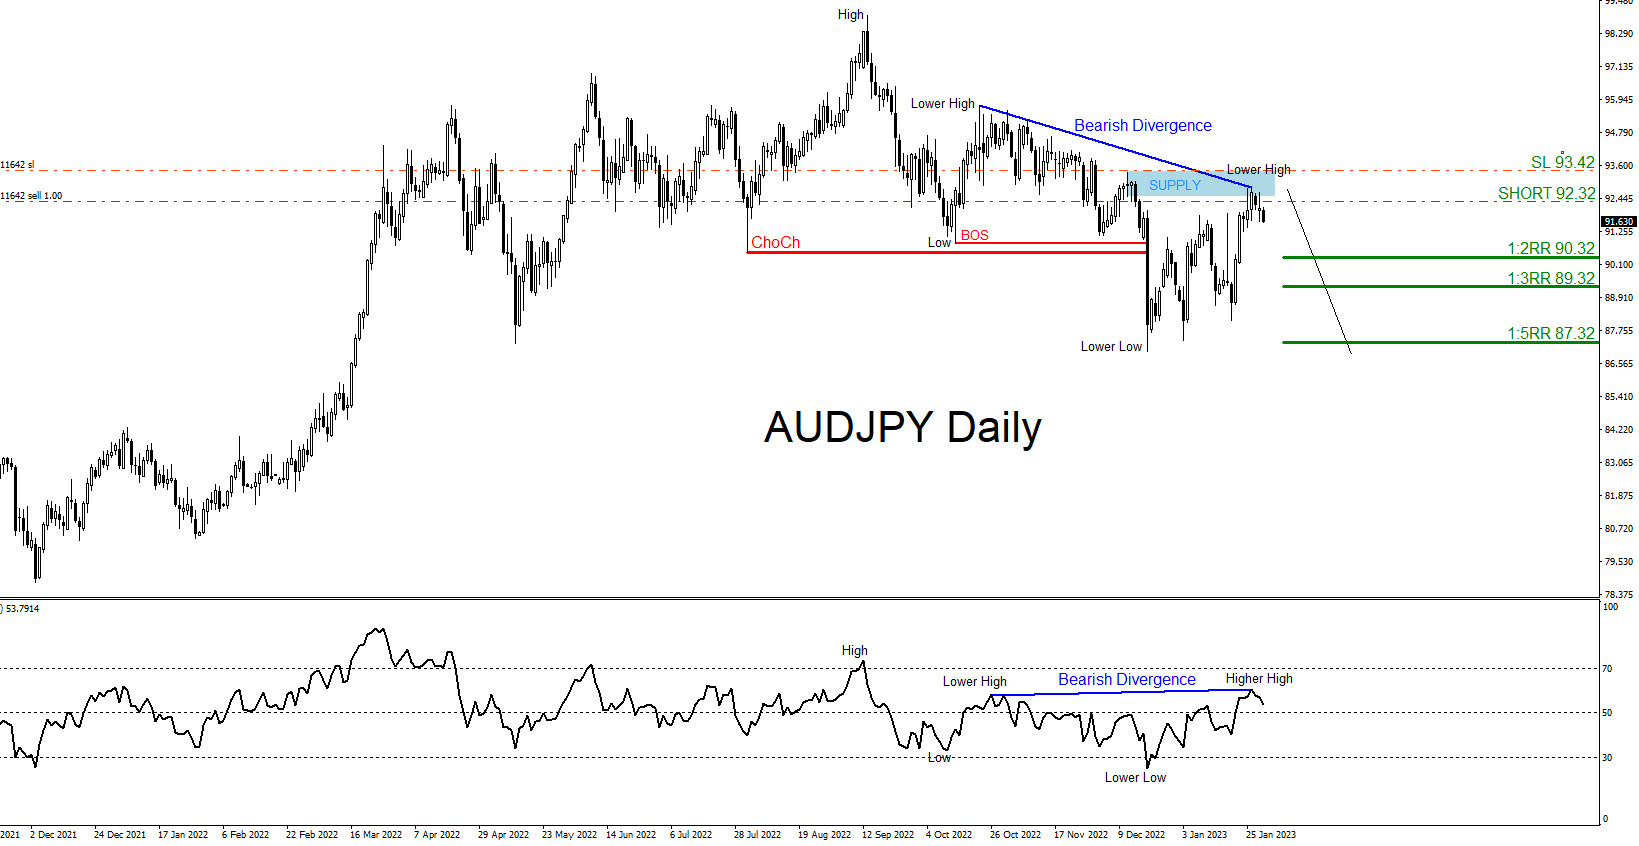 AUDJPY : Possible Move Lower?